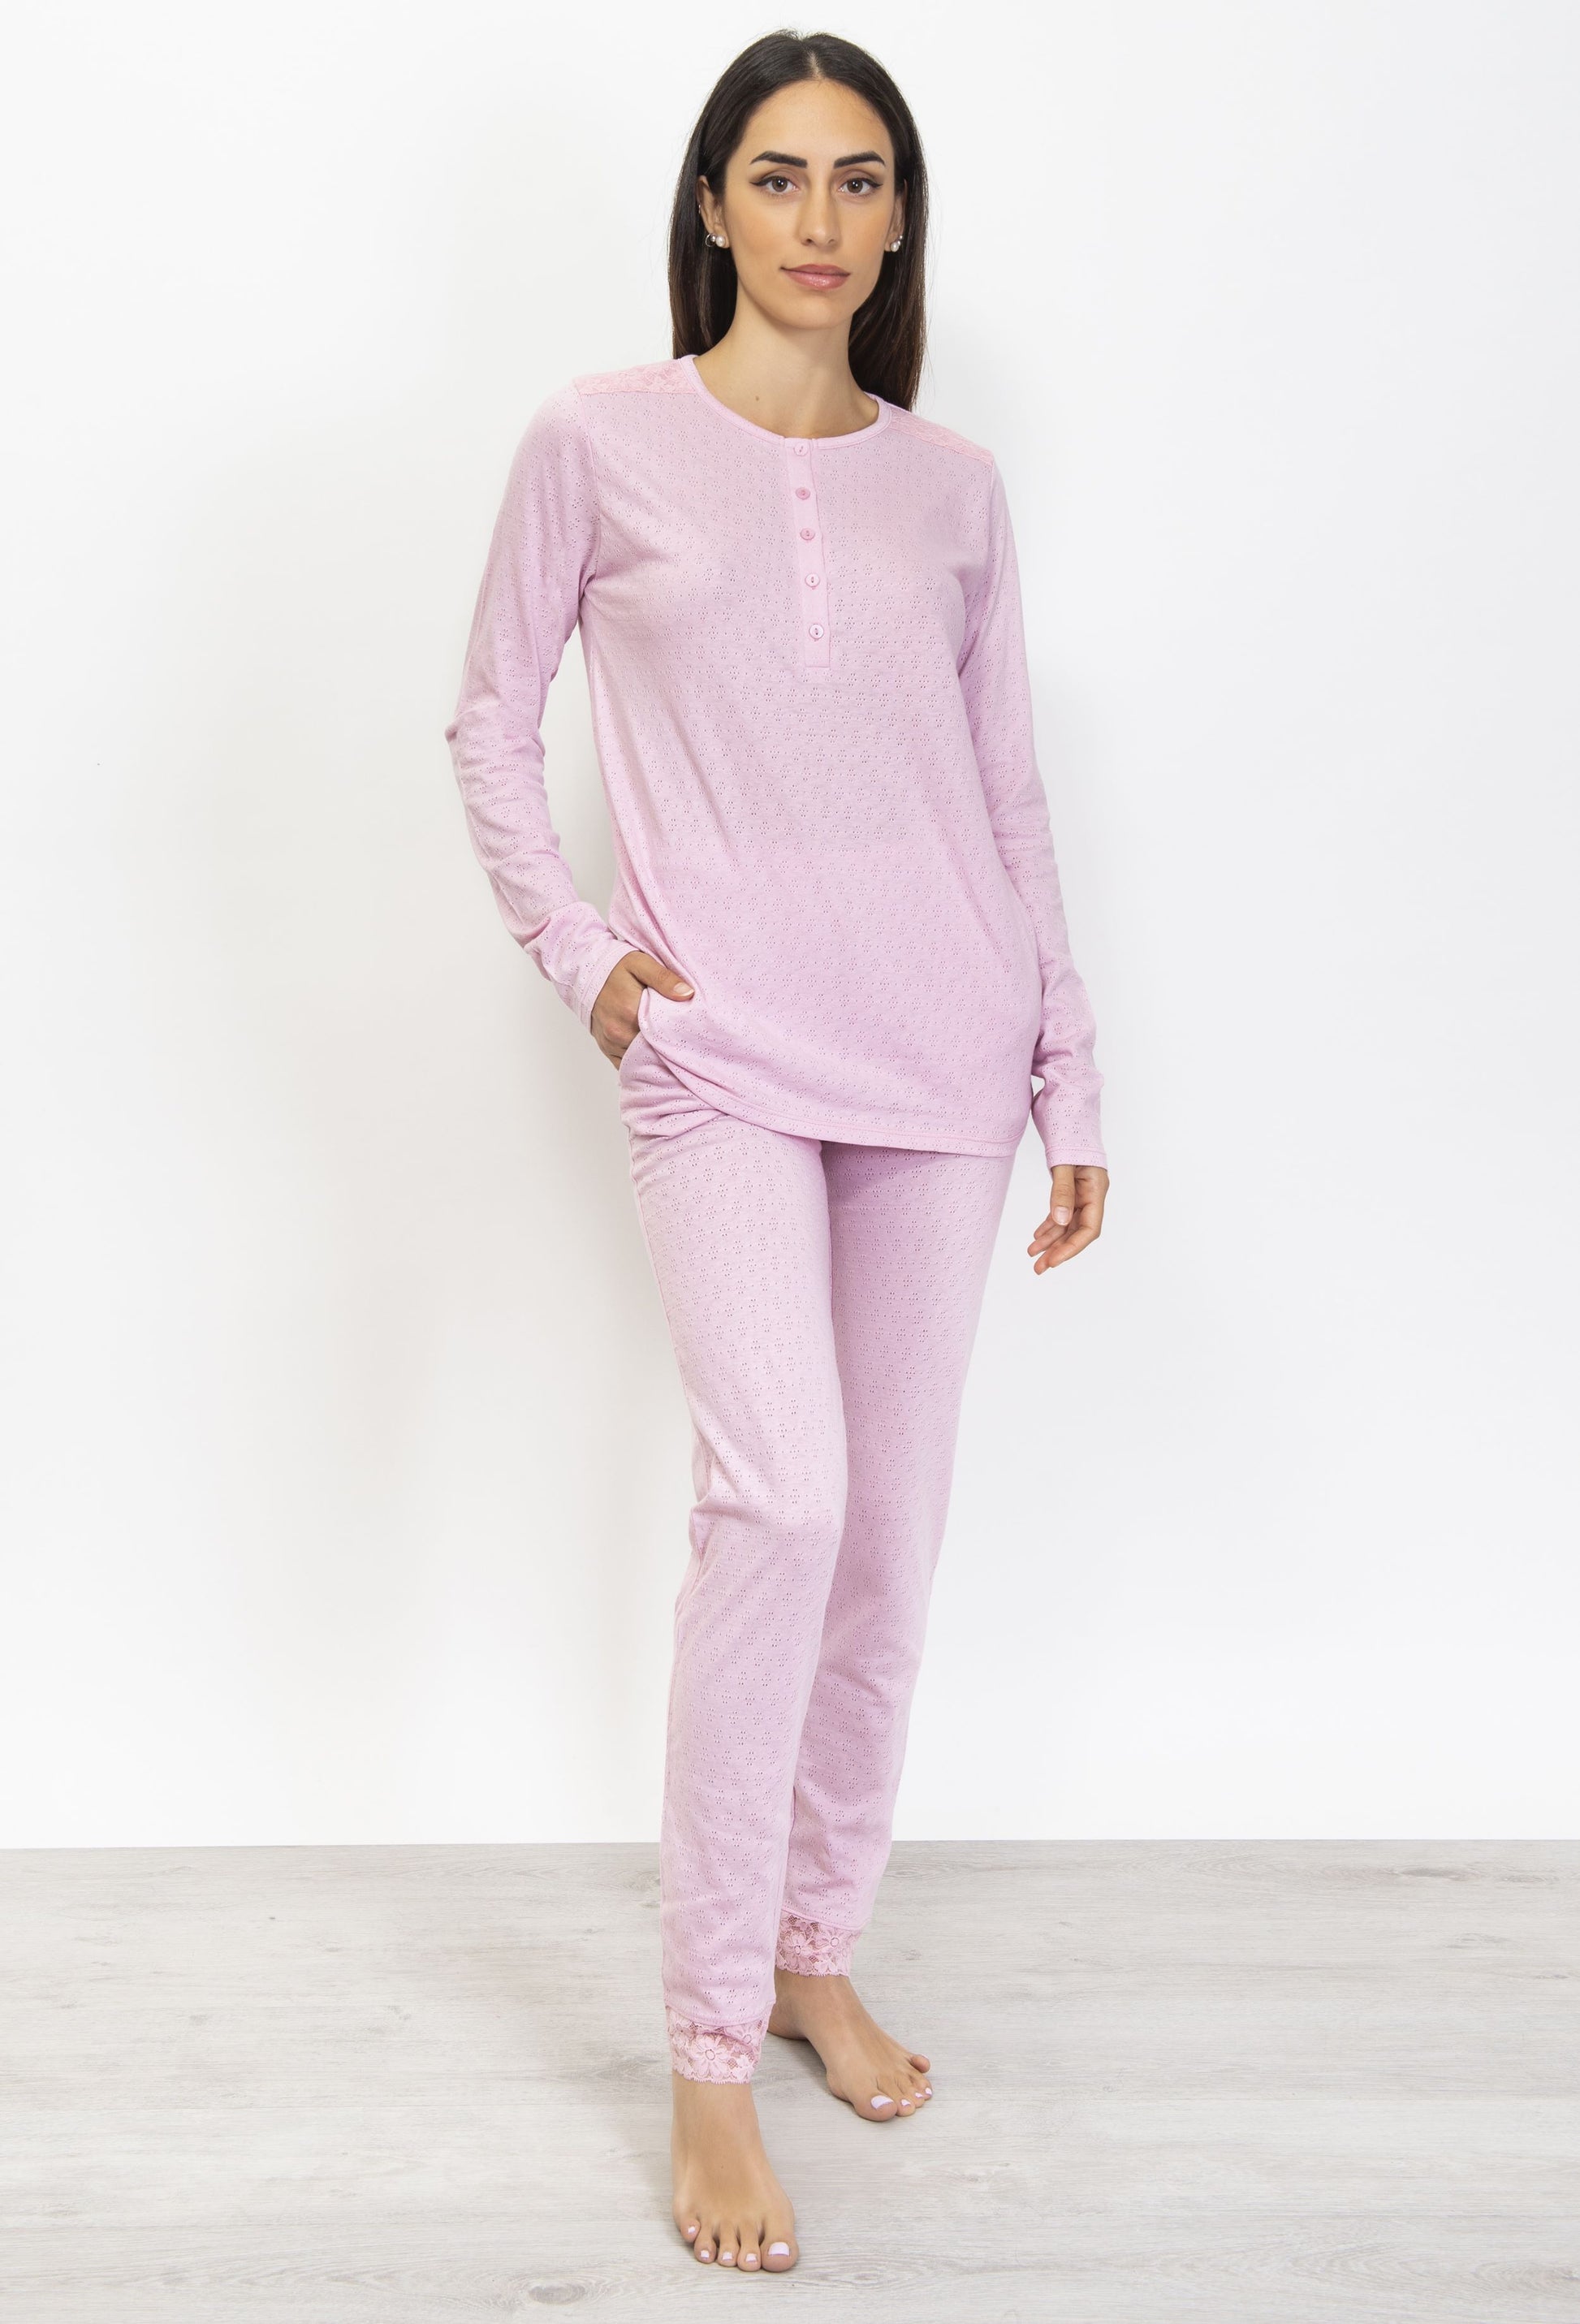 This premium pointelle cotton pajama set is crafted with a soft, subtly-textured fabric. Its long-sleeved top and trousers feature an elegant color palette that strikes a balance between comfort and style. 